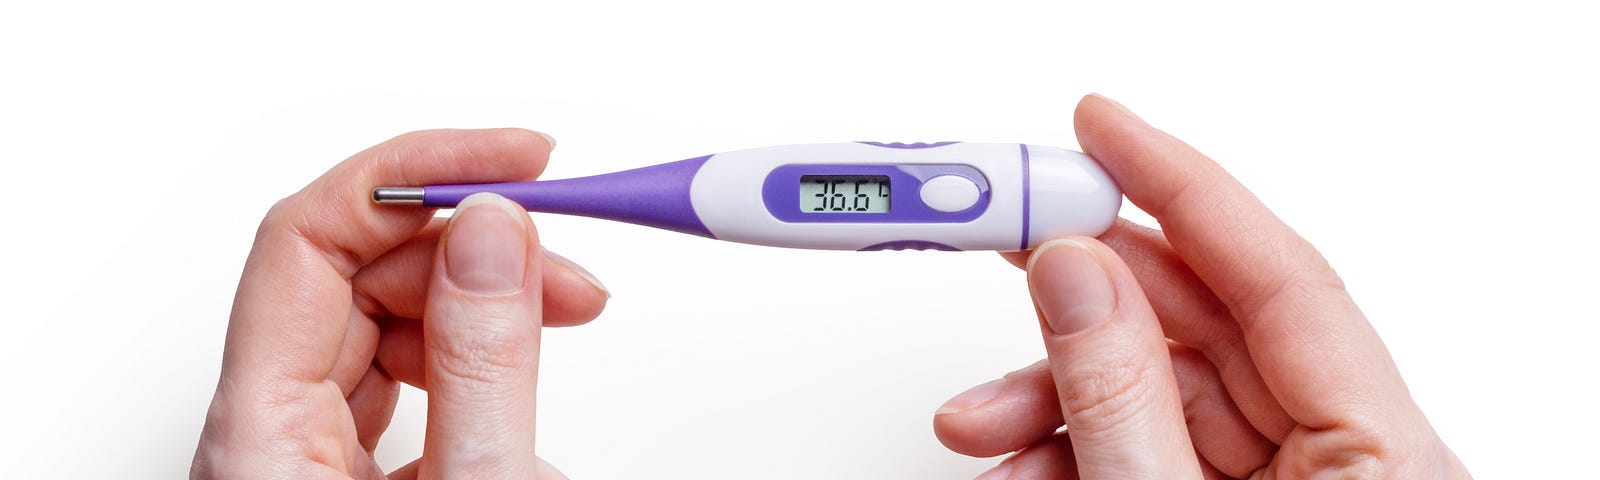 A digital thermometer displays temperature of 36.6 degrees.